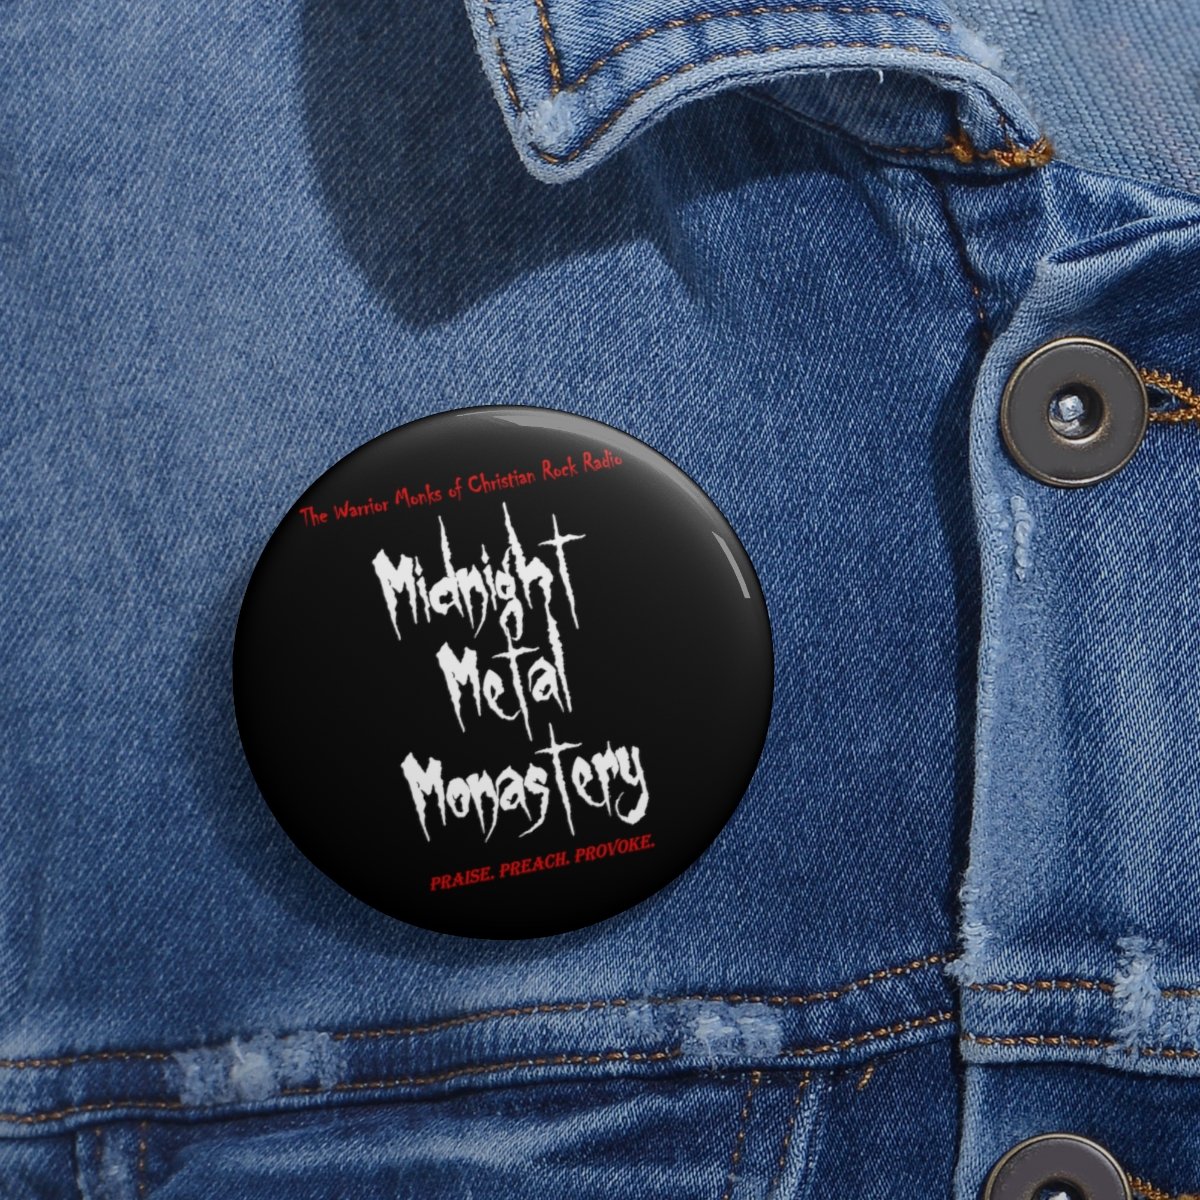 Midnight Metal Monastery Pin Buttons